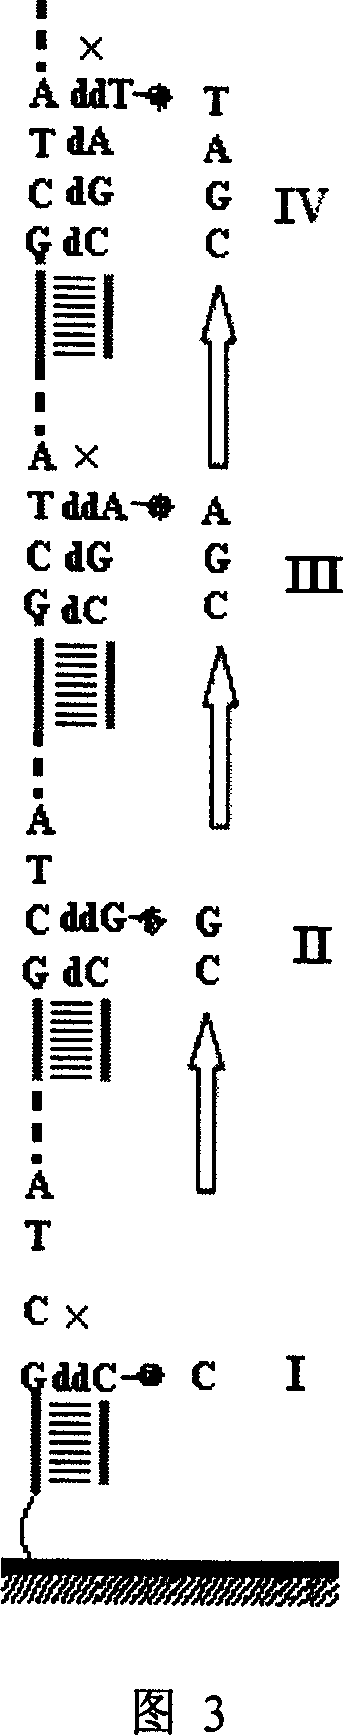 Nucleic acid sequencing process based on micro array chip